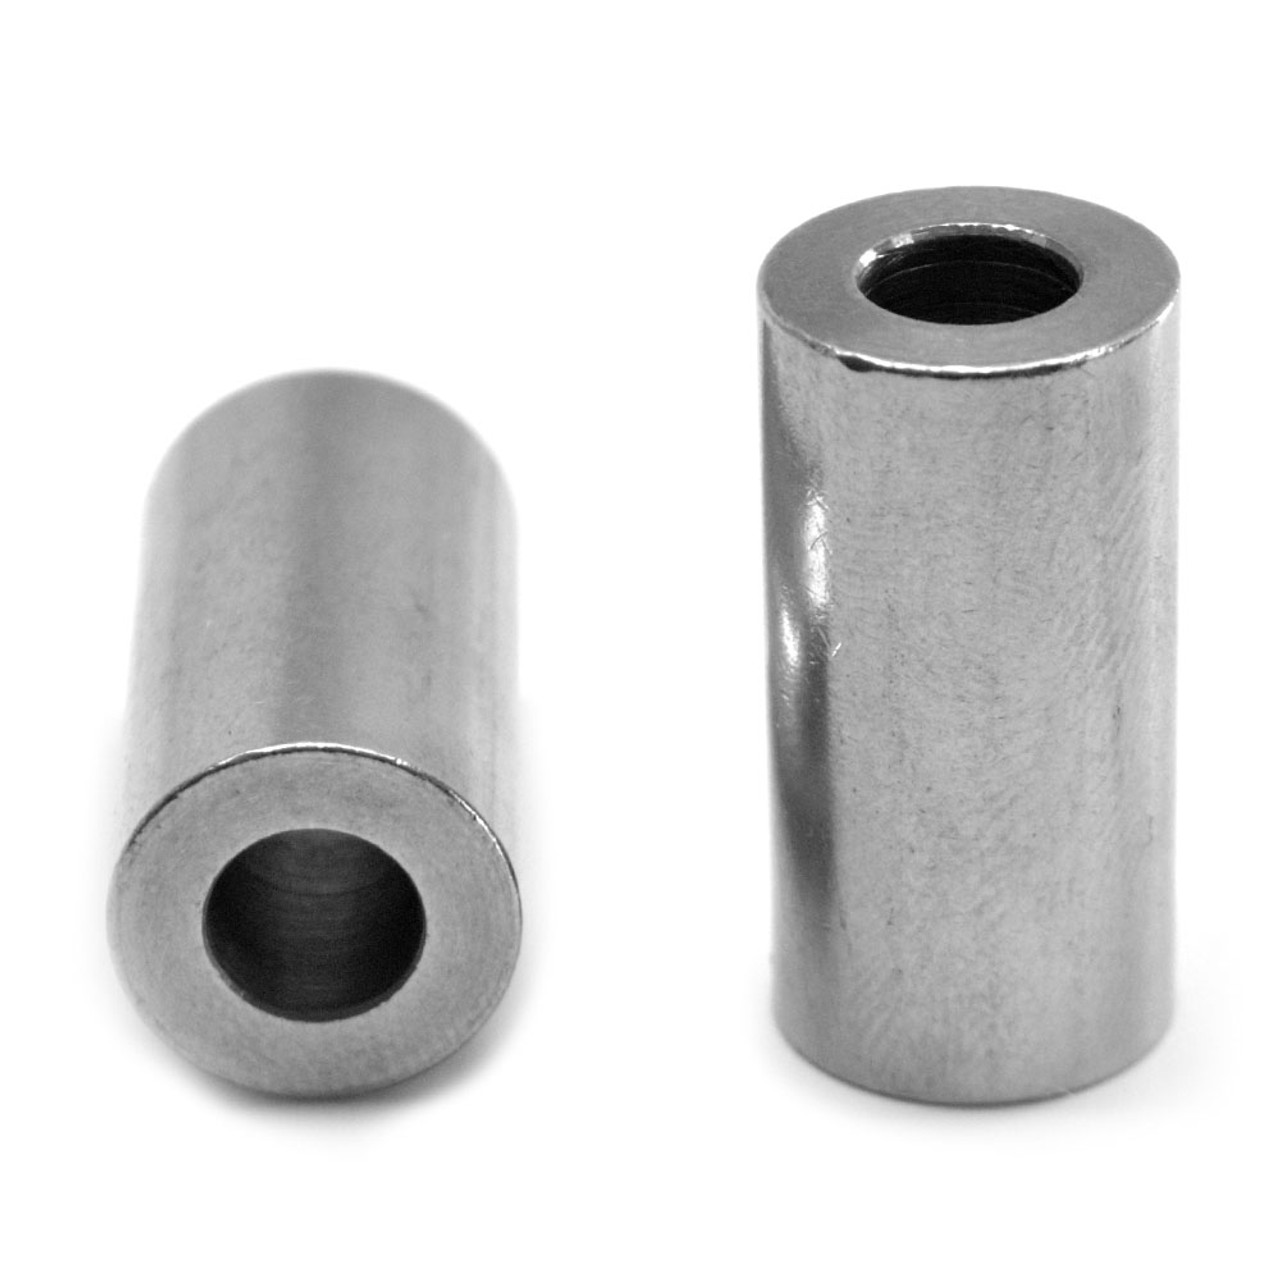 #14 x 1/8" x 1/2" OD Round Spacer Stainless Steel 18-8